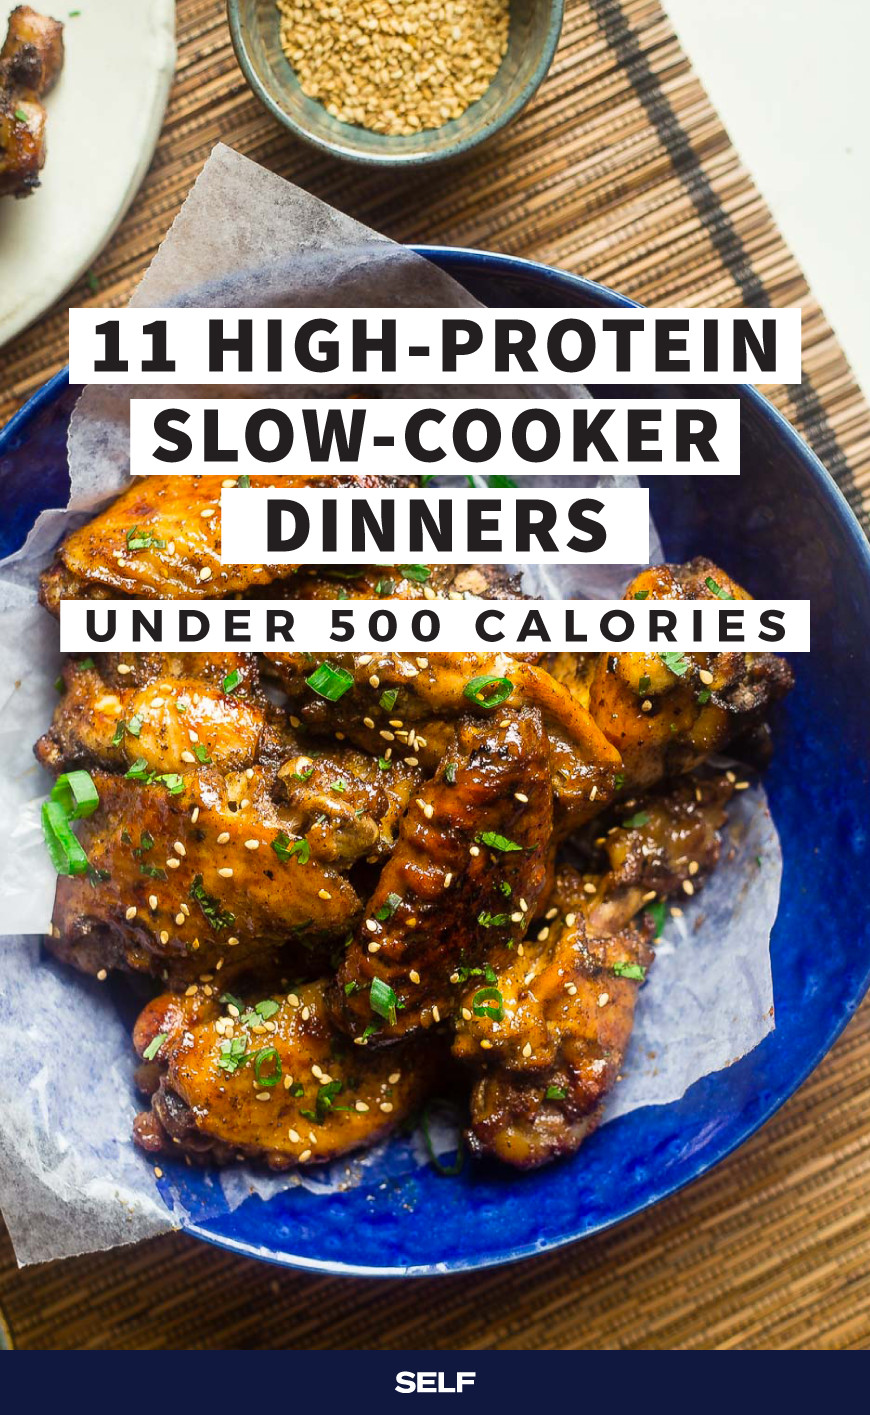 High Protein Low Carb Slow Cooker Recipes
 11 High Protein Slow Cooker Dinners Under 500 Calories